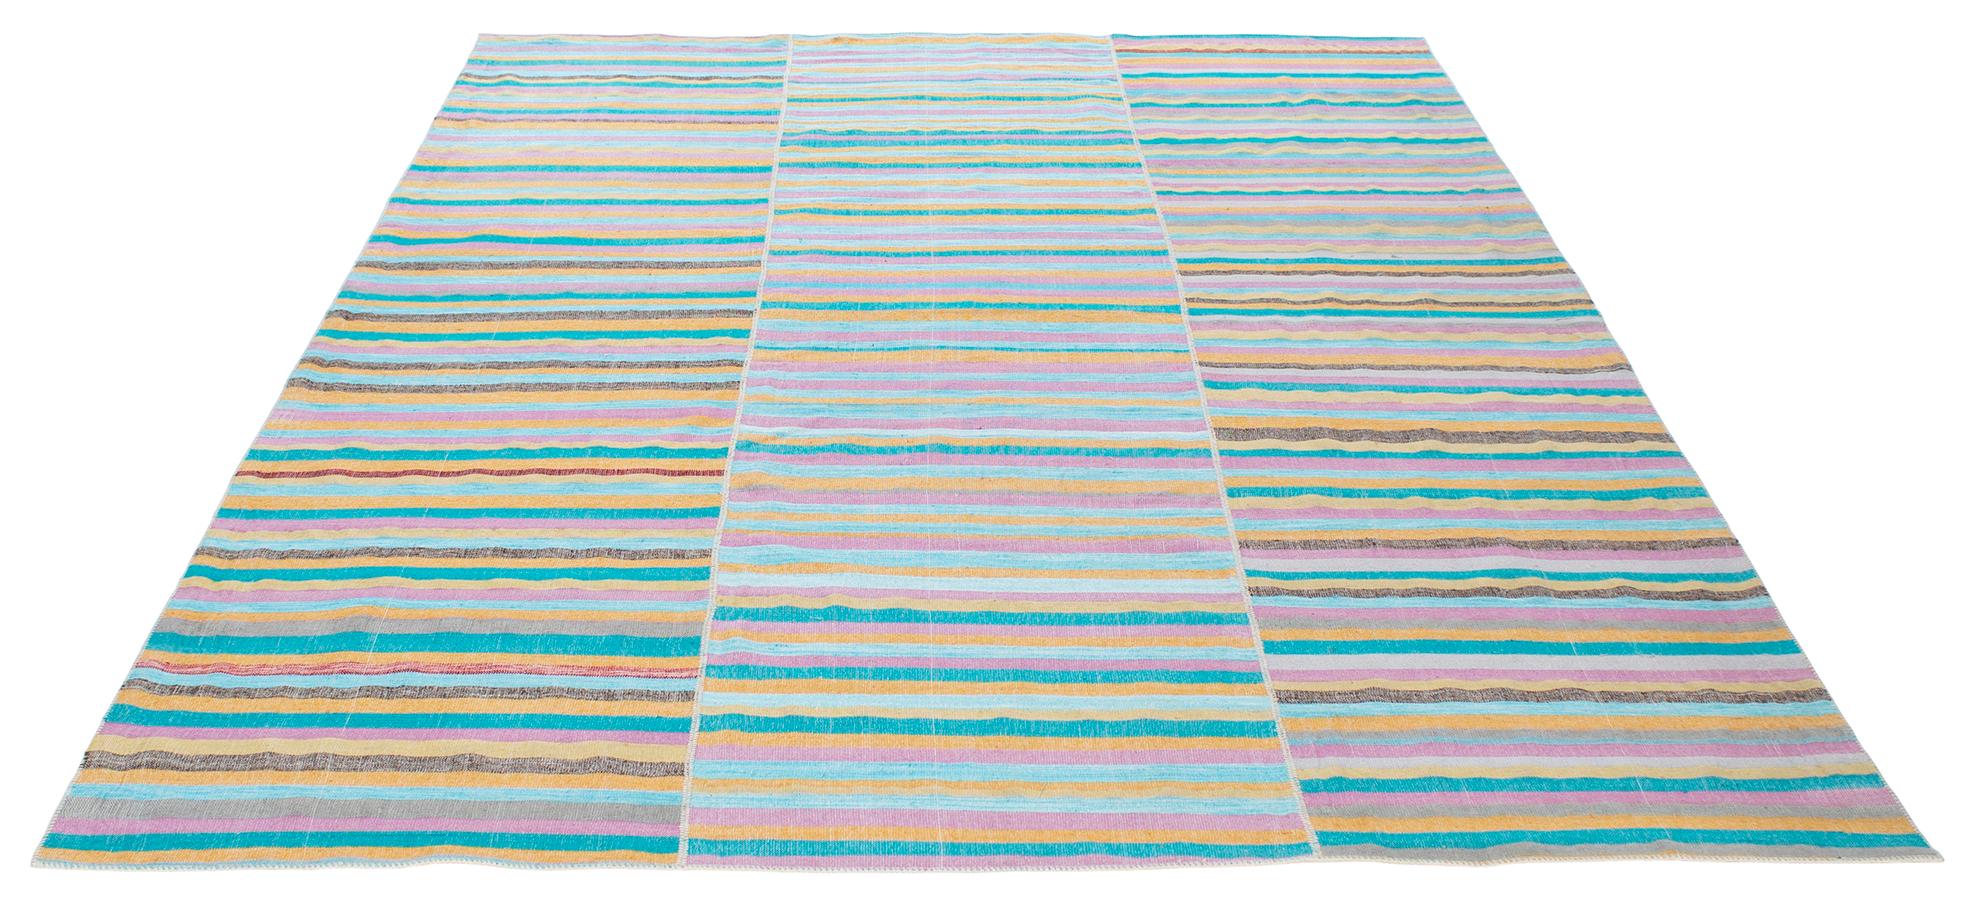 Hand-Woven Vintage Mid-Century Modern Minimalist Colorful Striped Flatweave Rug For Sale